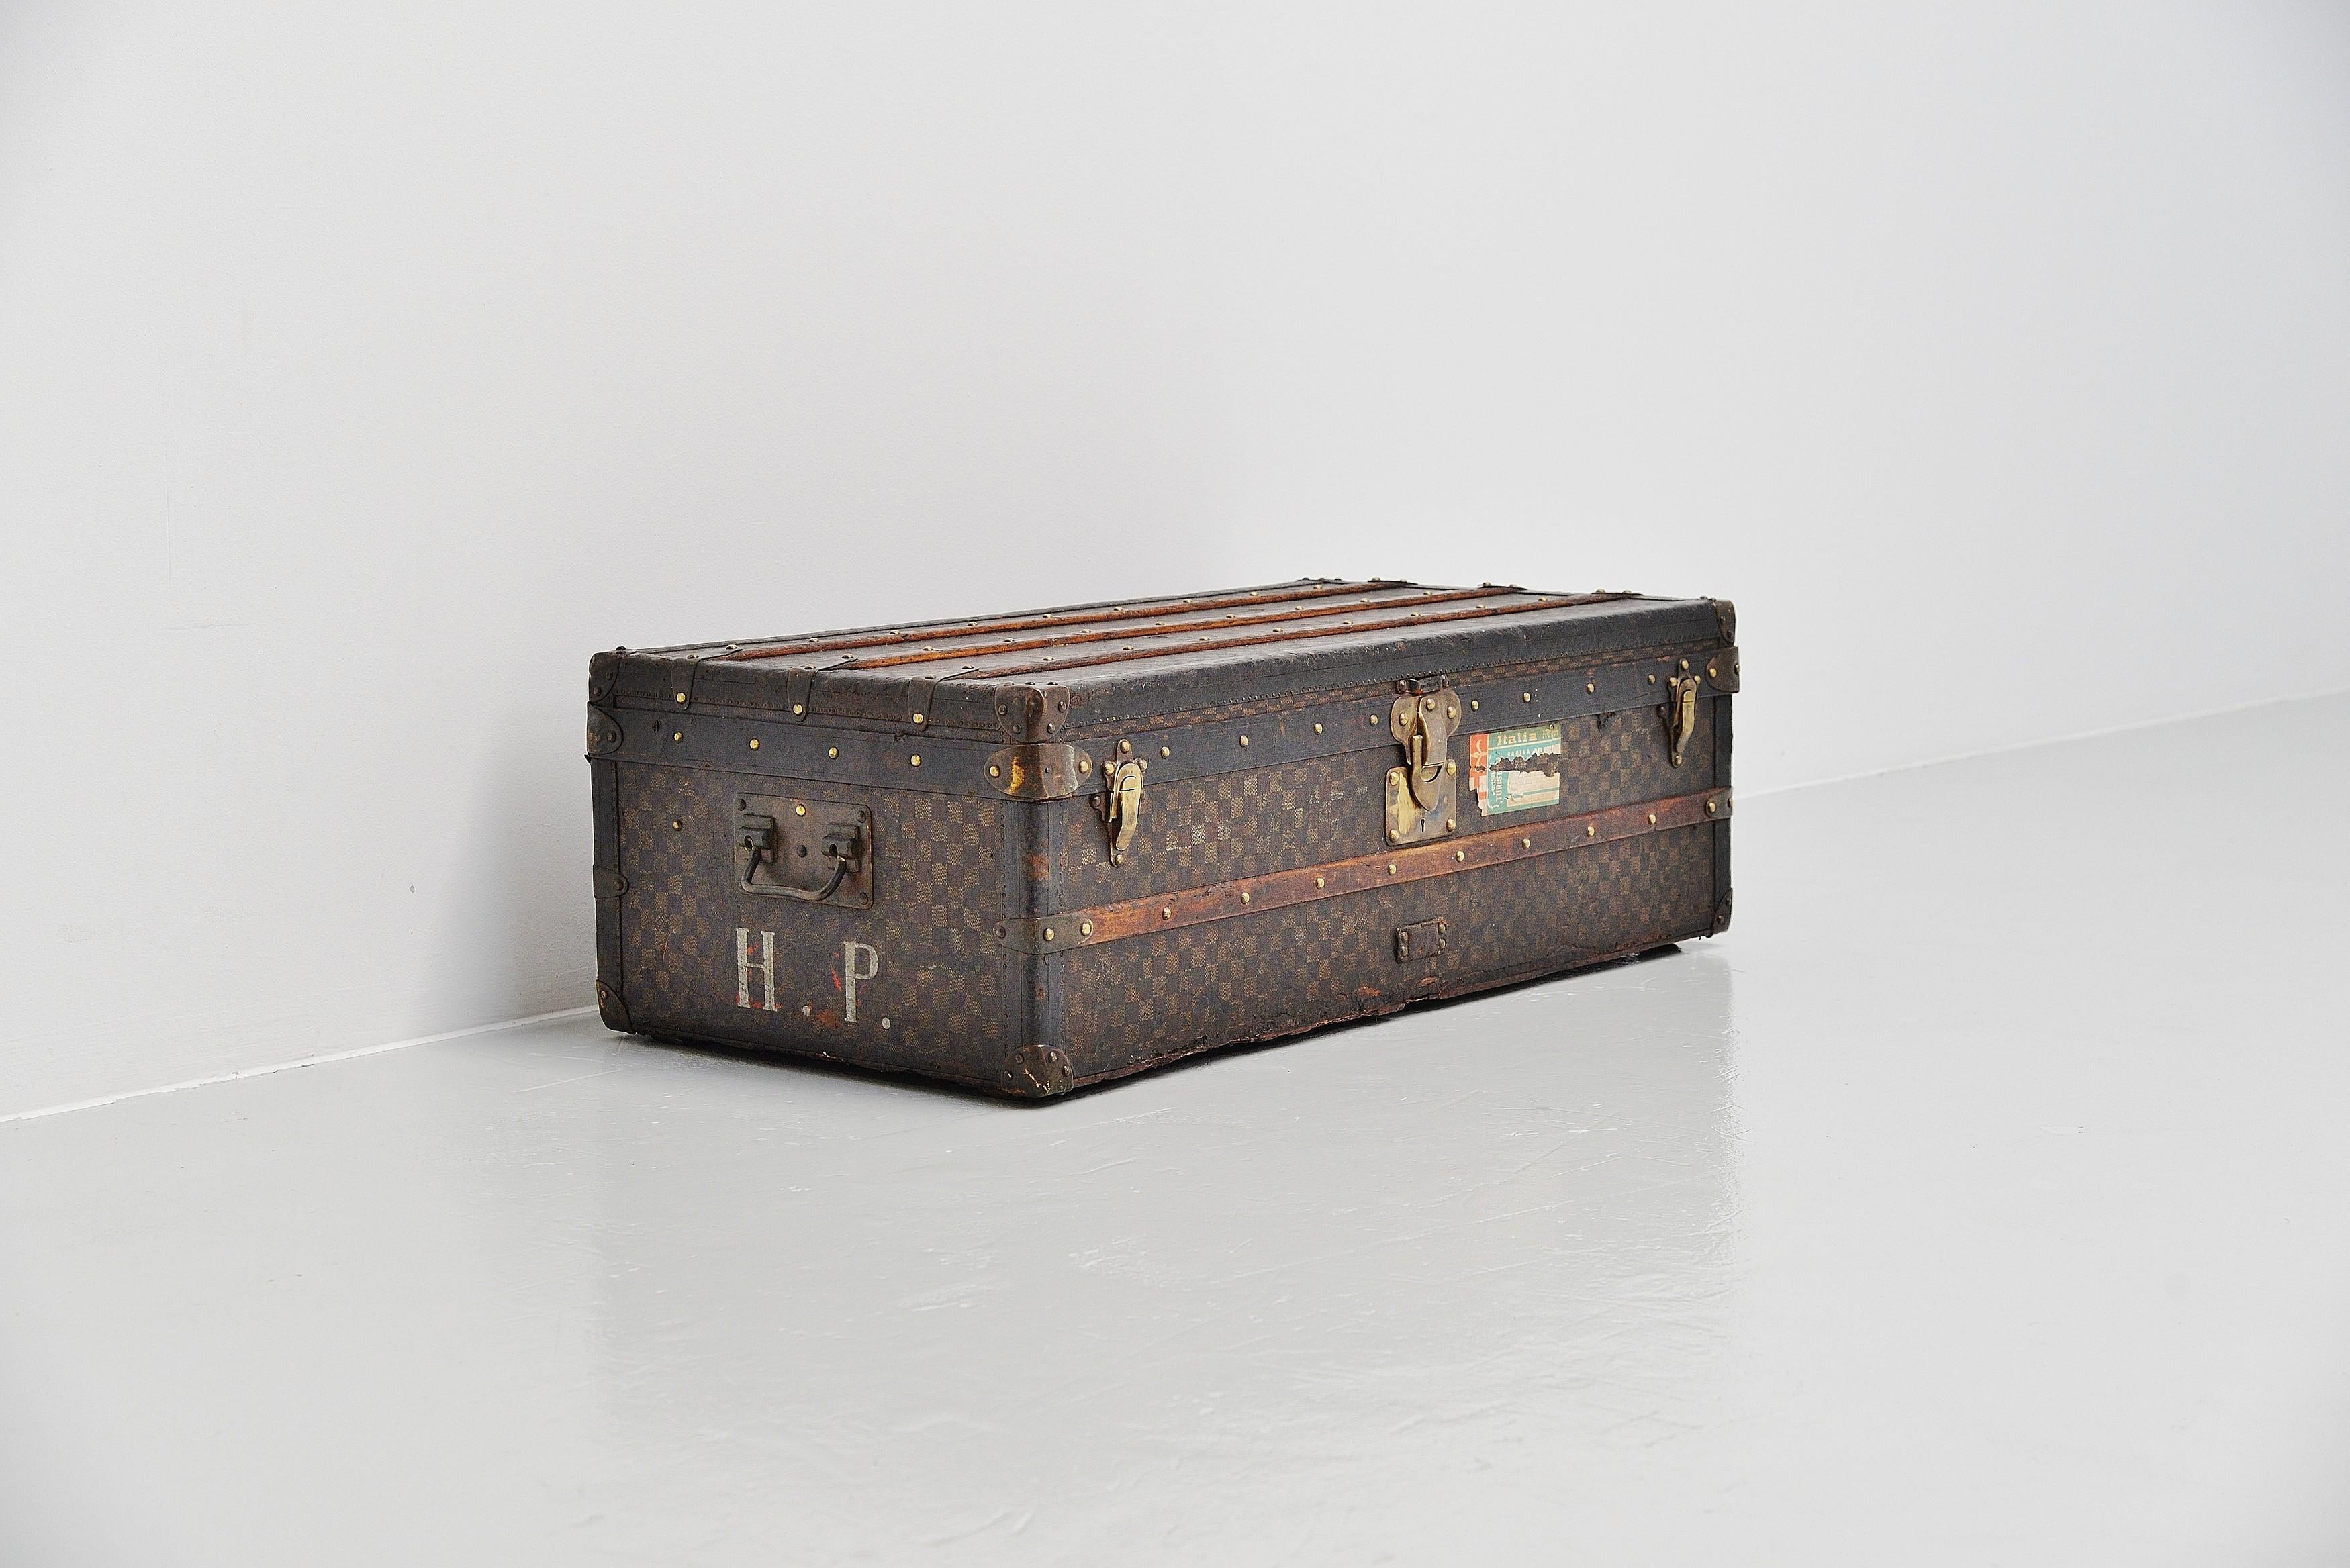 From the collection of Savineti we offer this very rare Louis Vuitton Damier Trunk:
-	Brand: Louis Vuitton
-	Model: Damier Trunk 
-	Year: 1910-1914
-	Condition: Good (for its age, used); some losses on the sides and underside -> please have a close